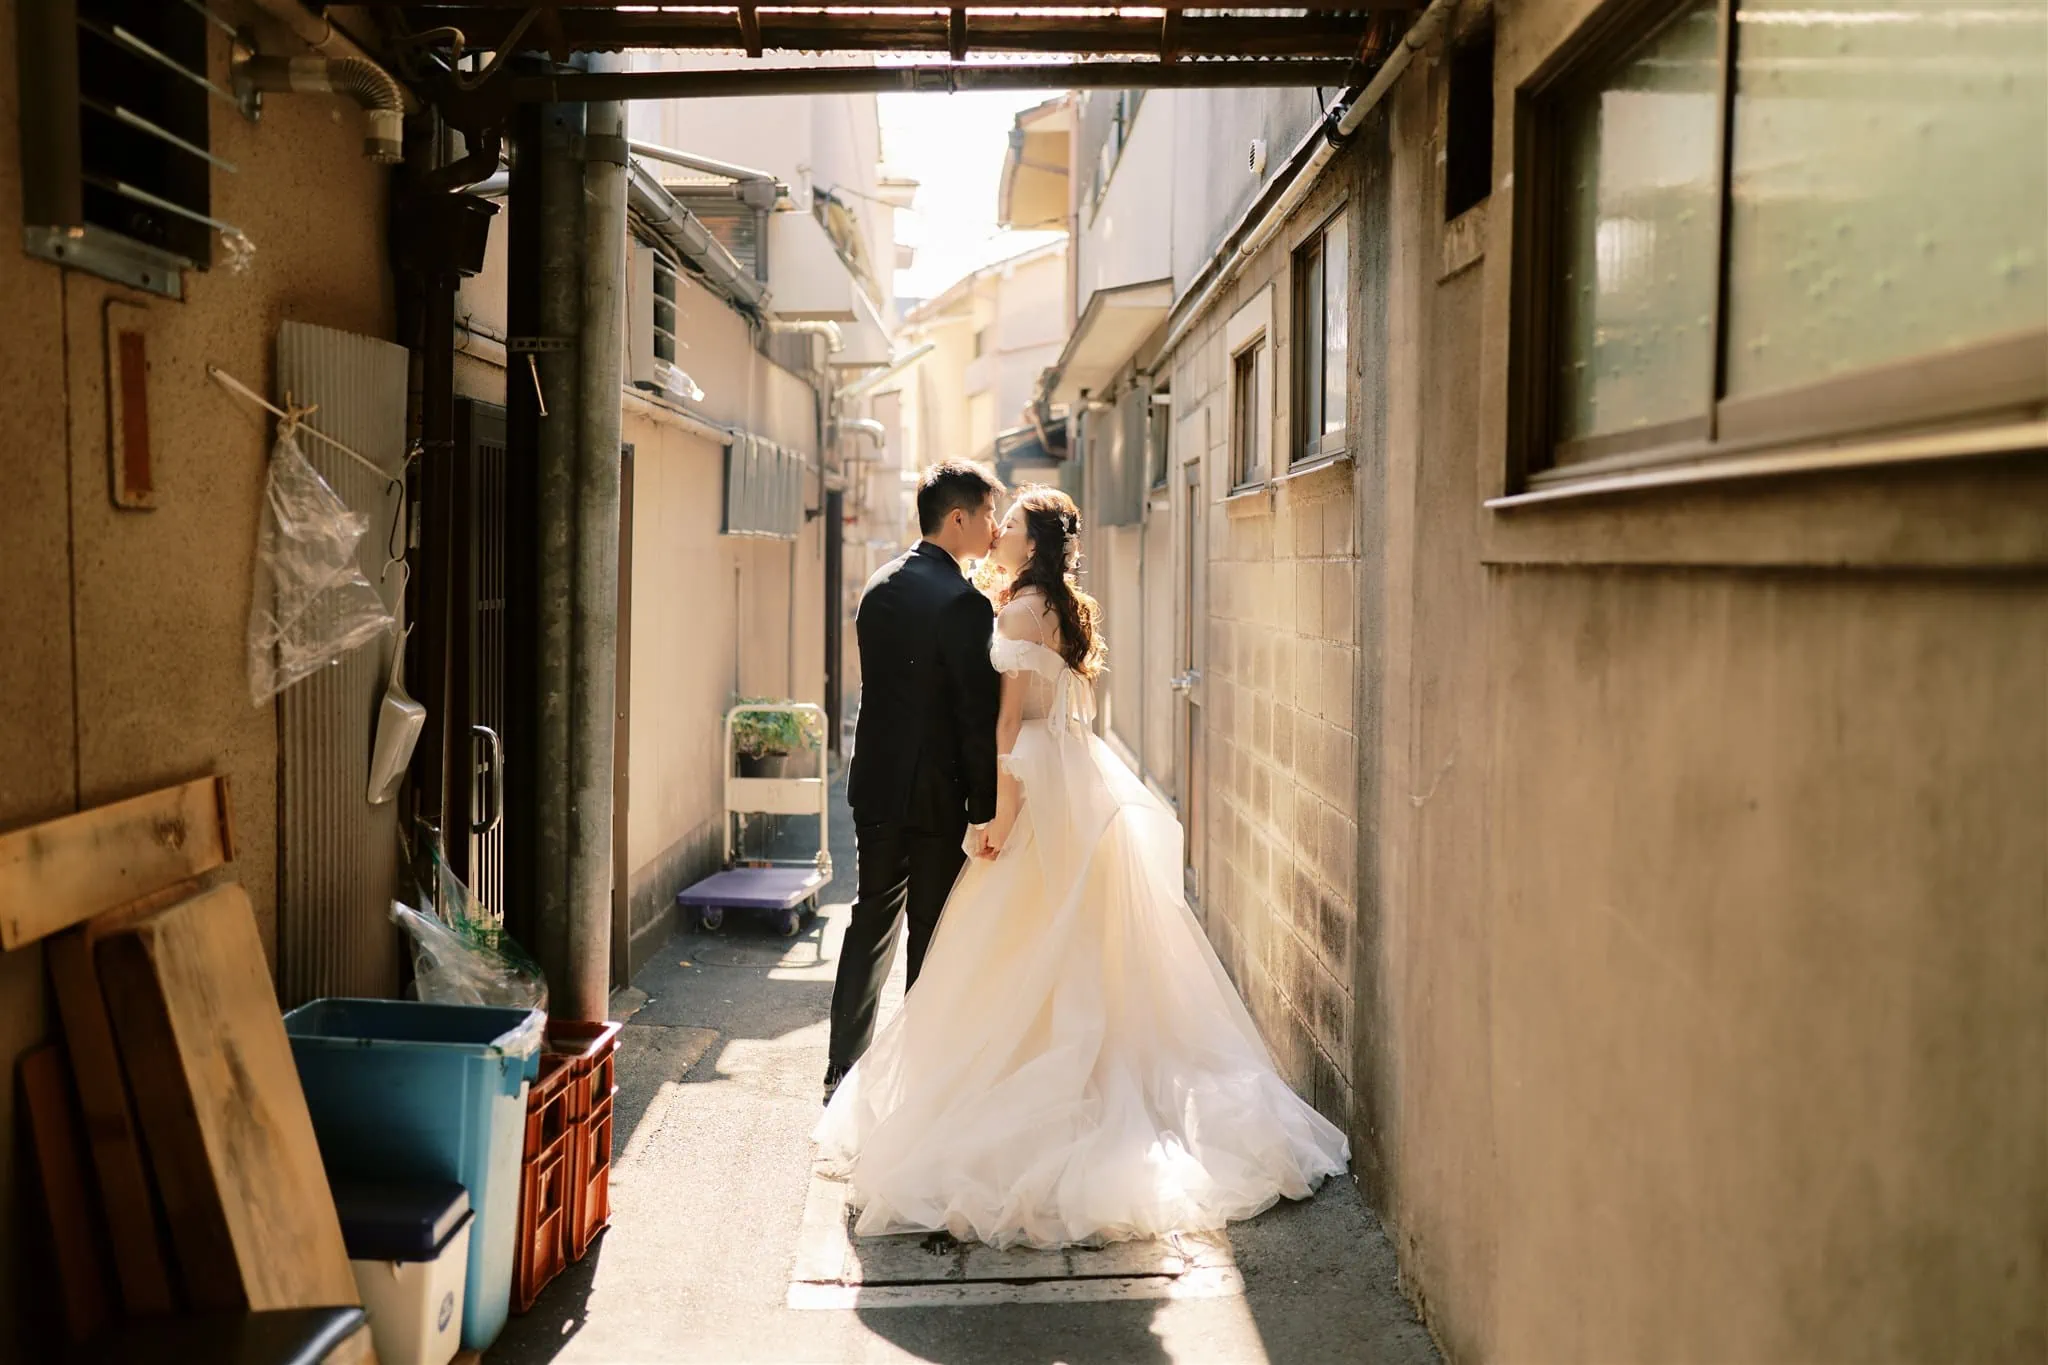 Kyoto Tokyo Japan Elopement Wedding Photographer, Planner & Videographer | A Japan elopement photographer captures an intimate moment between a bride and groom as they share a passionate kiss in an enchanting alleyway.